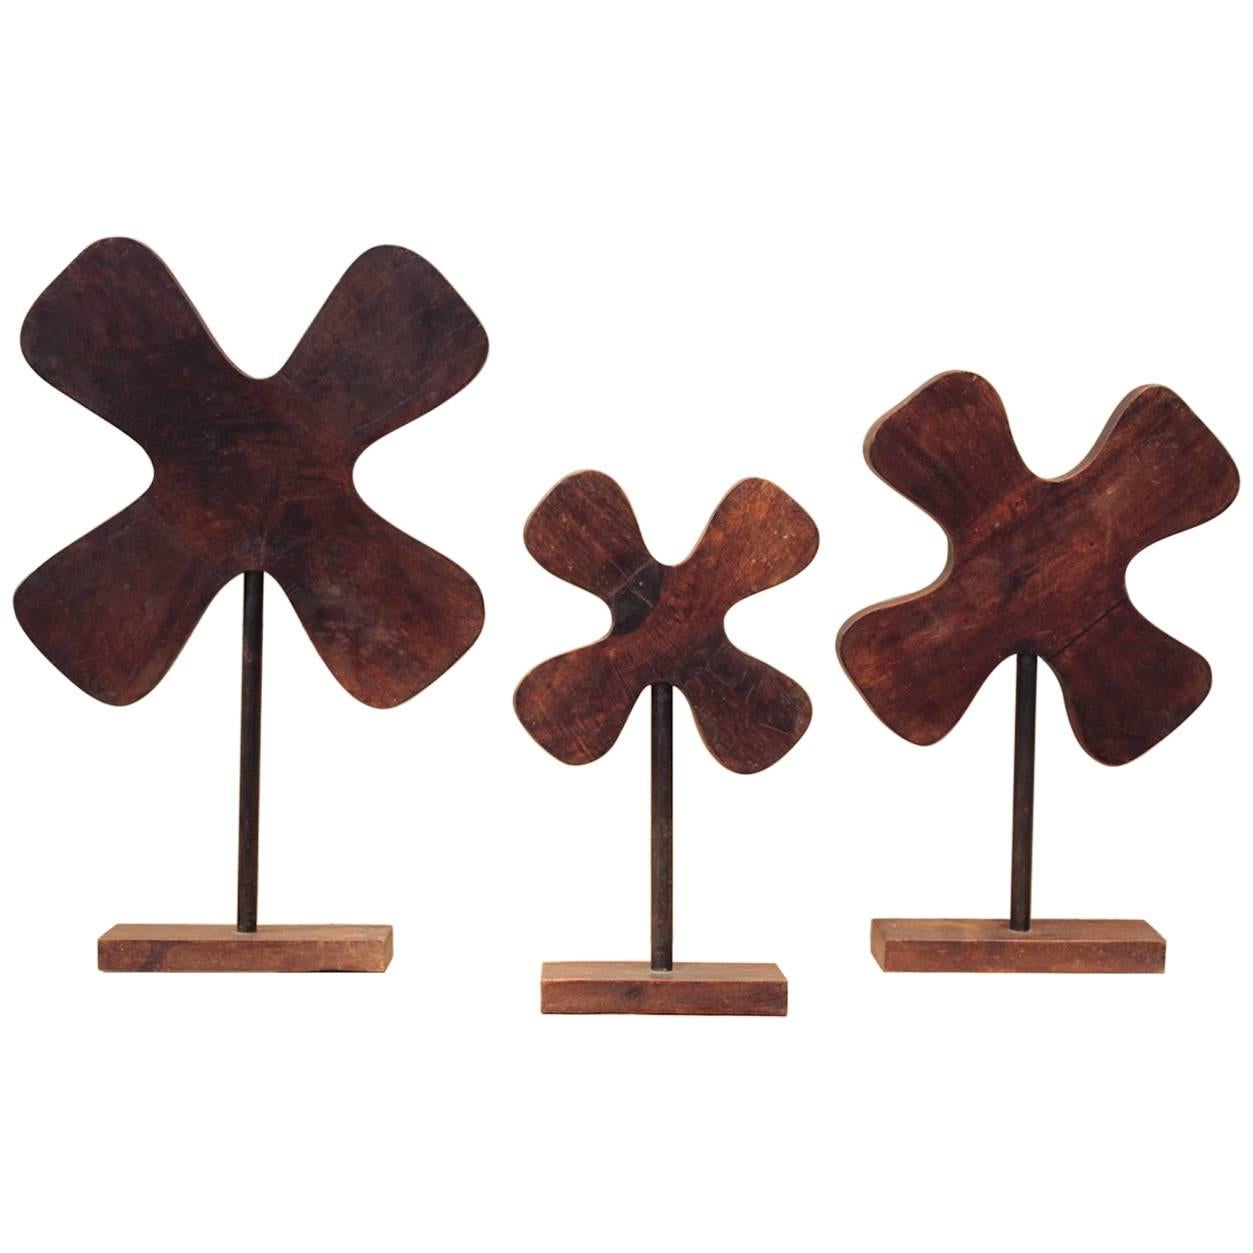 1960s Group of Three Wooden Profile Moulds